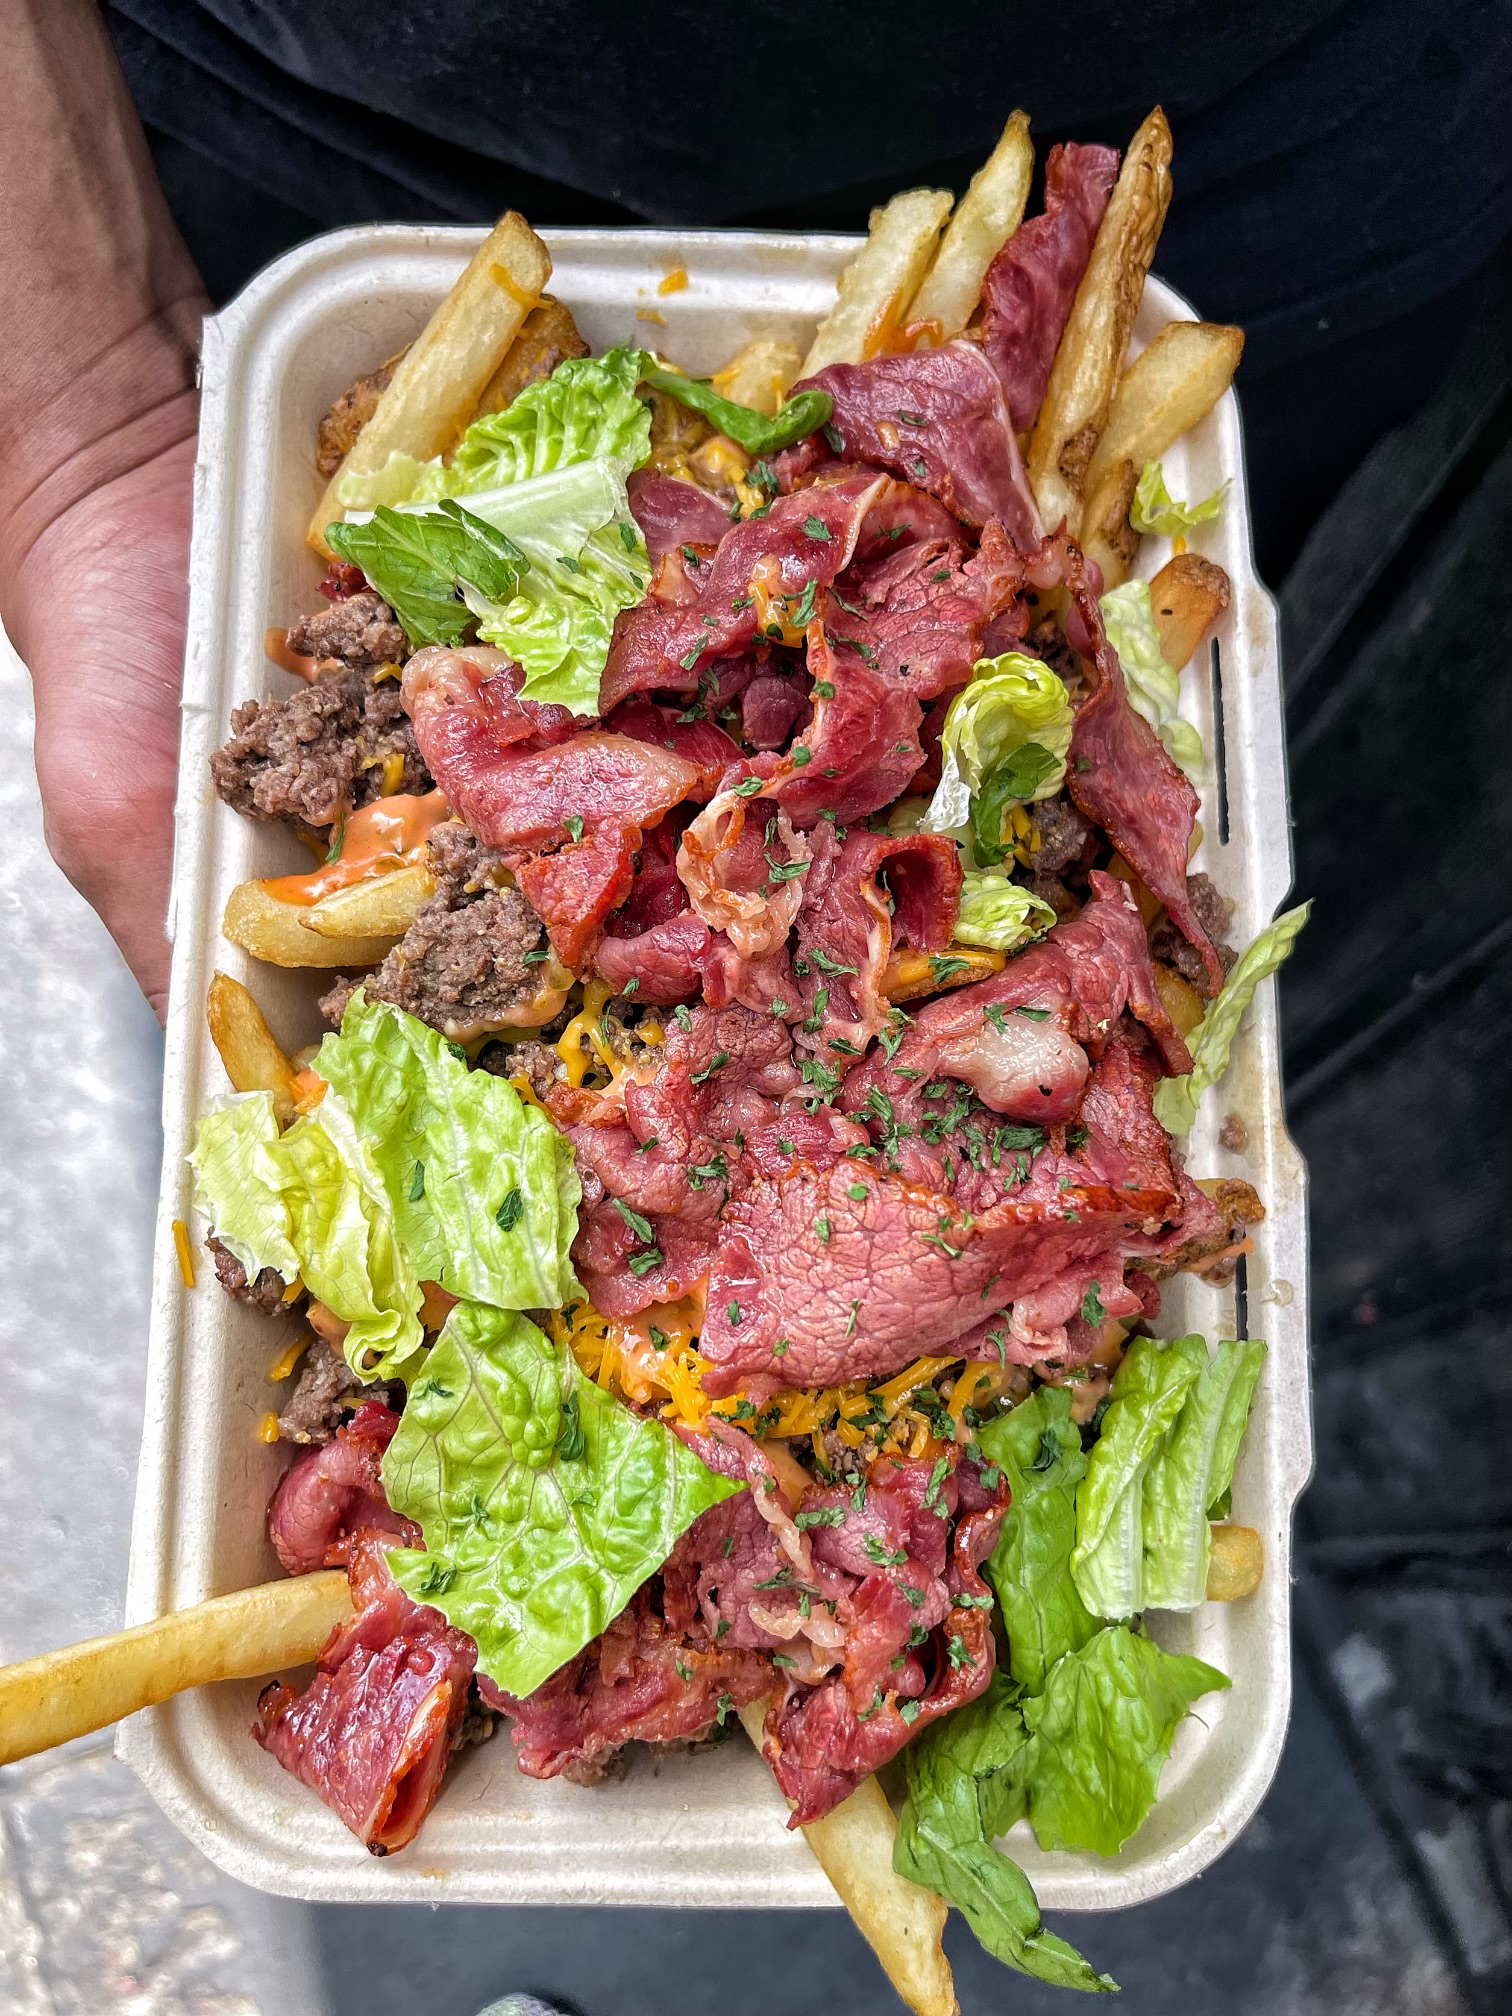 Colossal Burger Fries